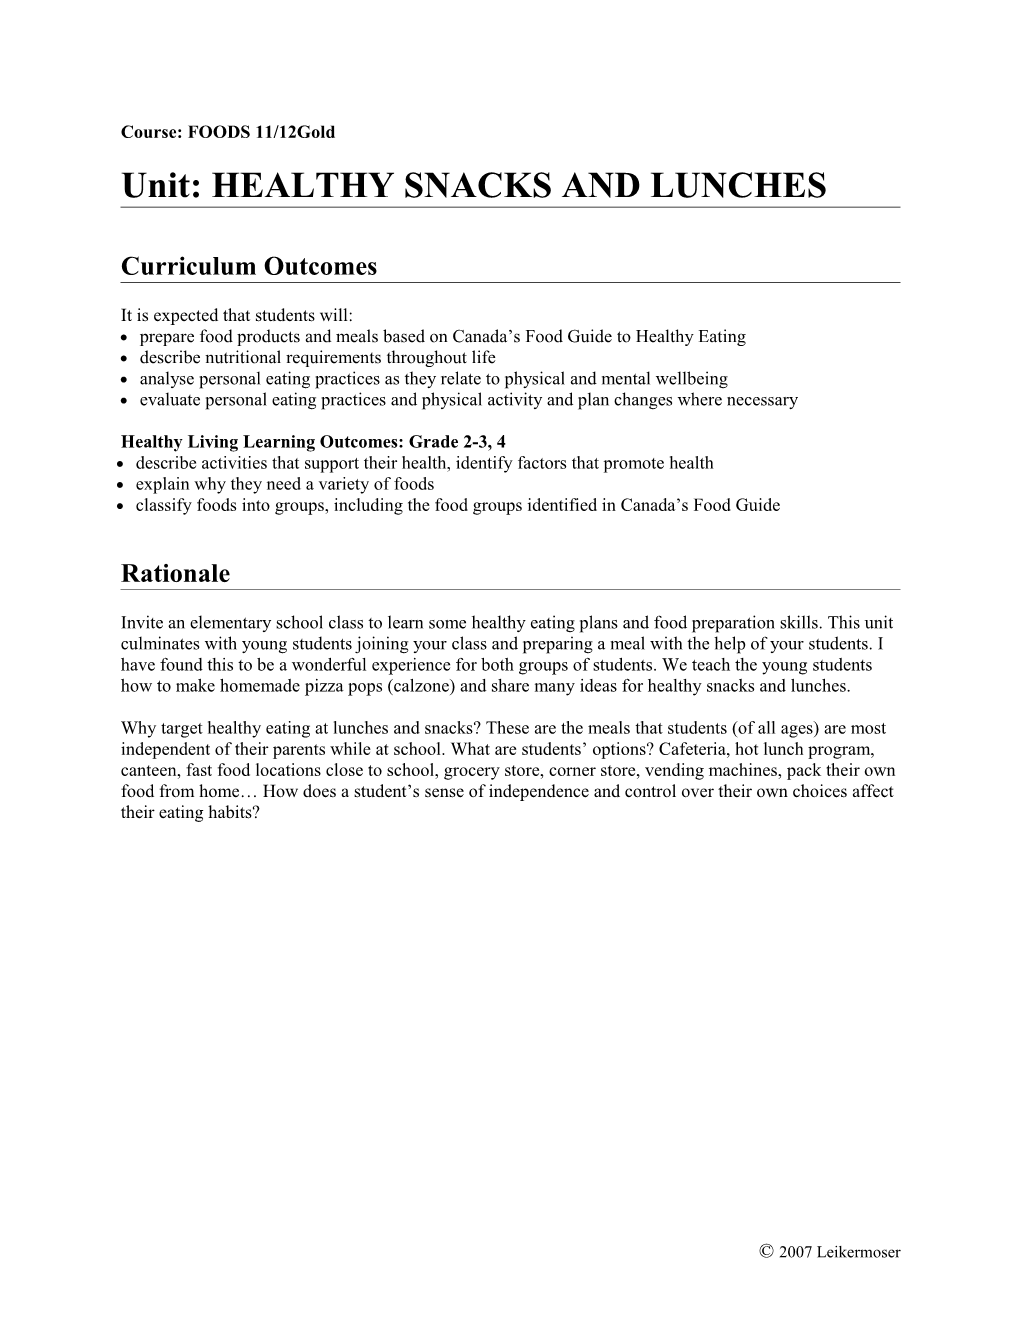 Unit: HEALTHY SNACKS and LUNCHES